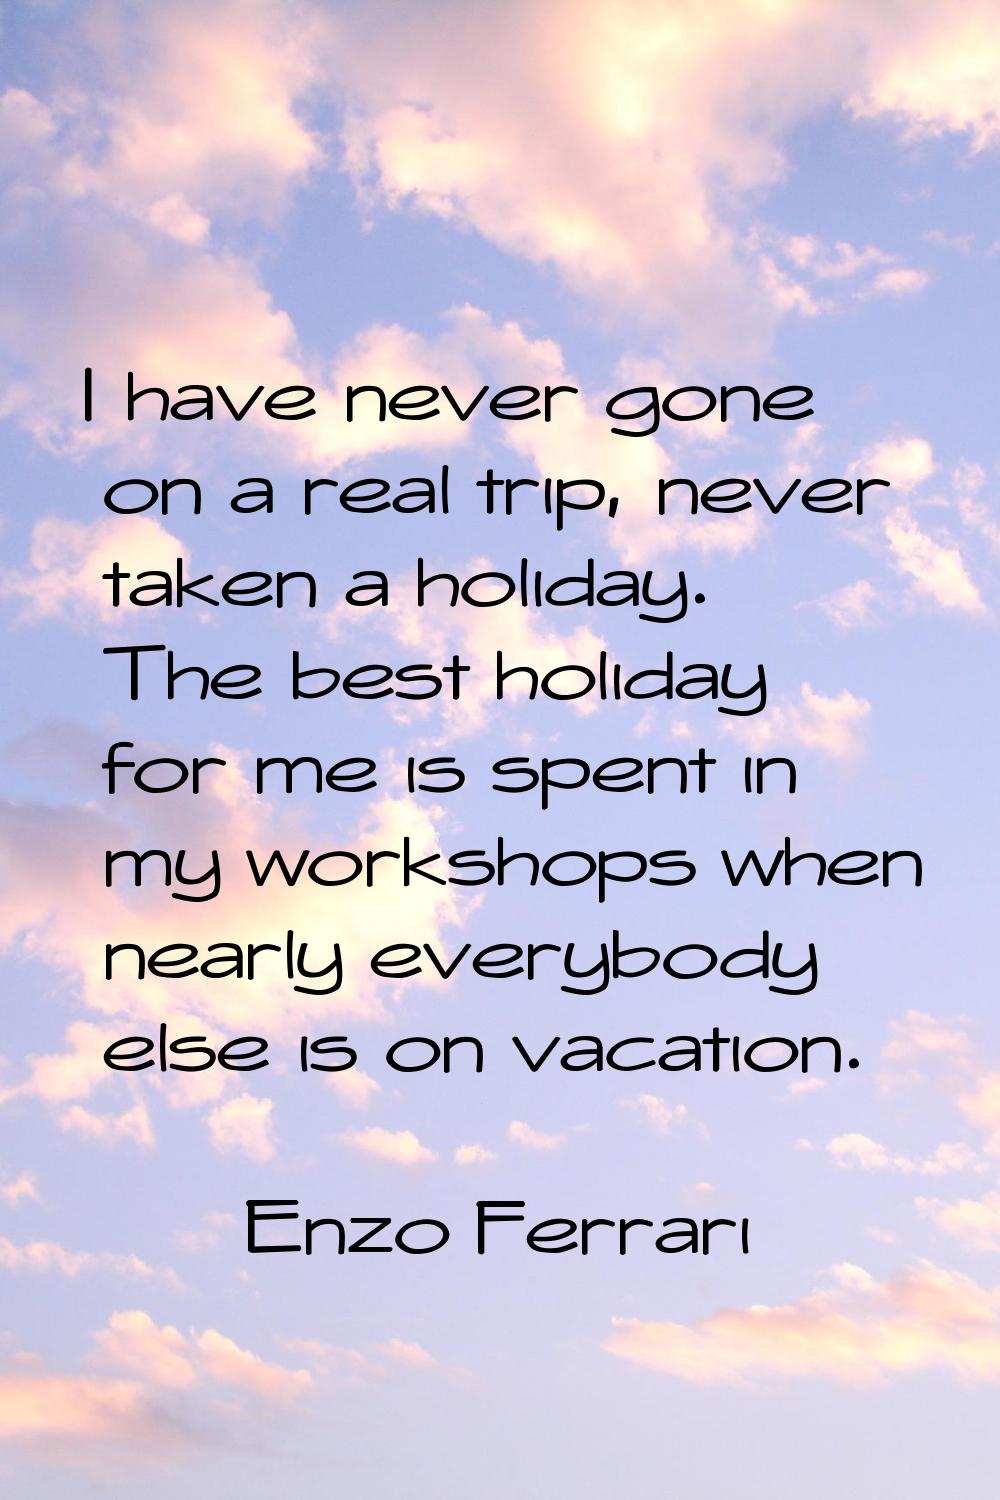 I have never gone on a real trip, never taken a holiday. The best holiday for me is spent in my wor